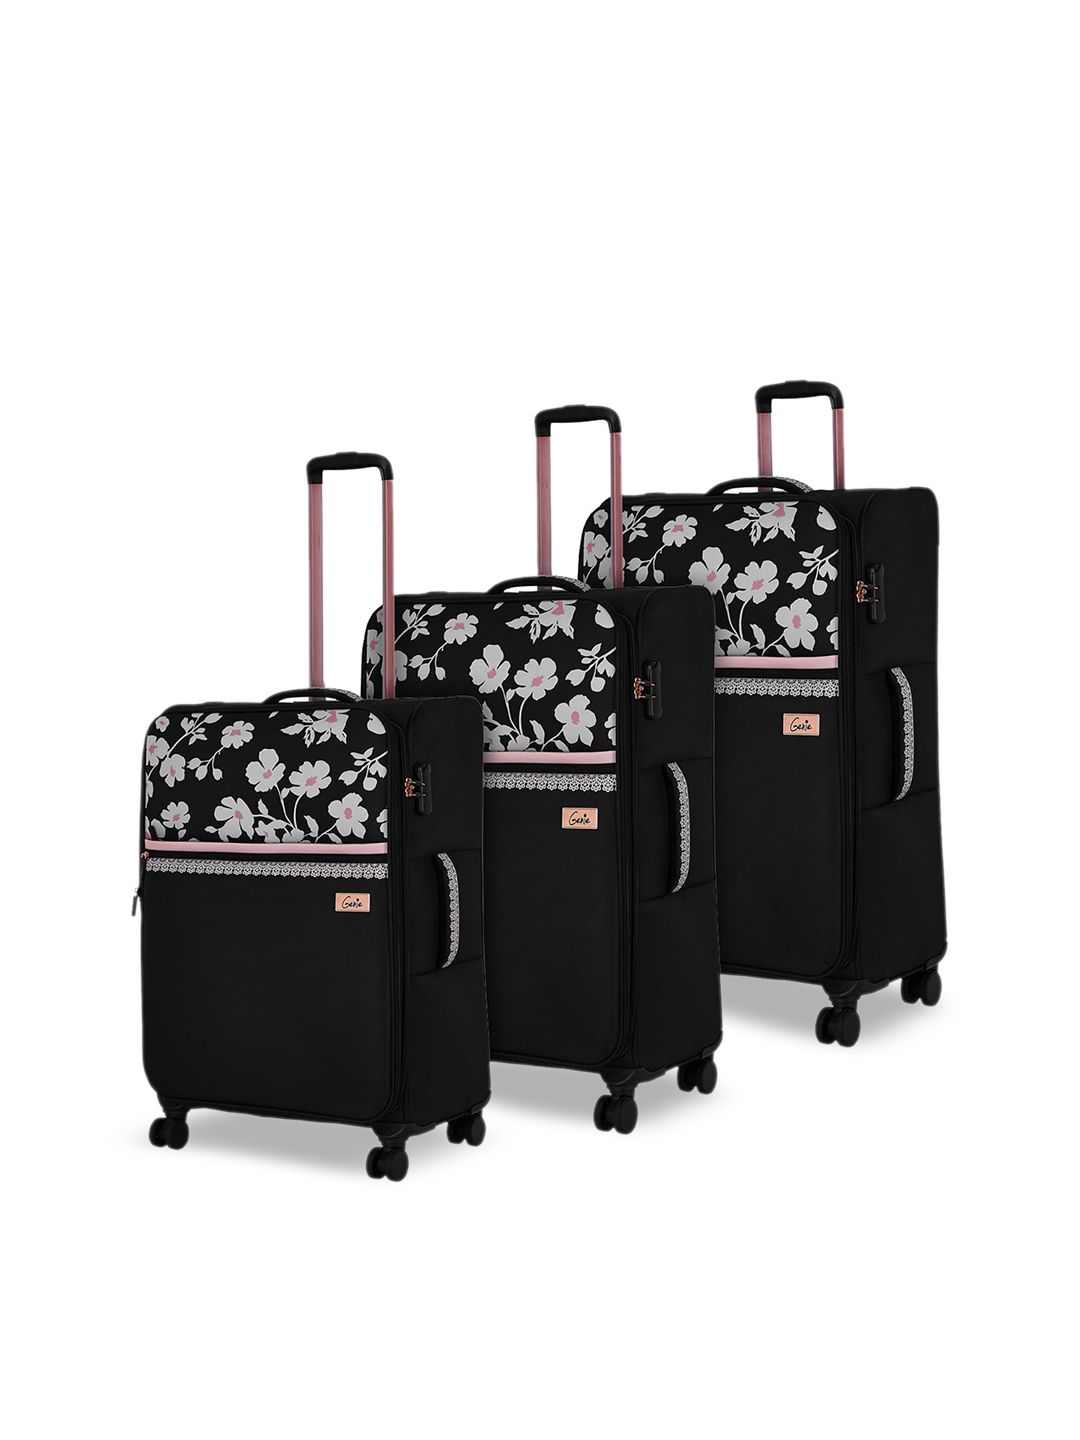 Genie Set Of 3 Black & White Printed Soft-Sided Trolley Suitcase Price in India